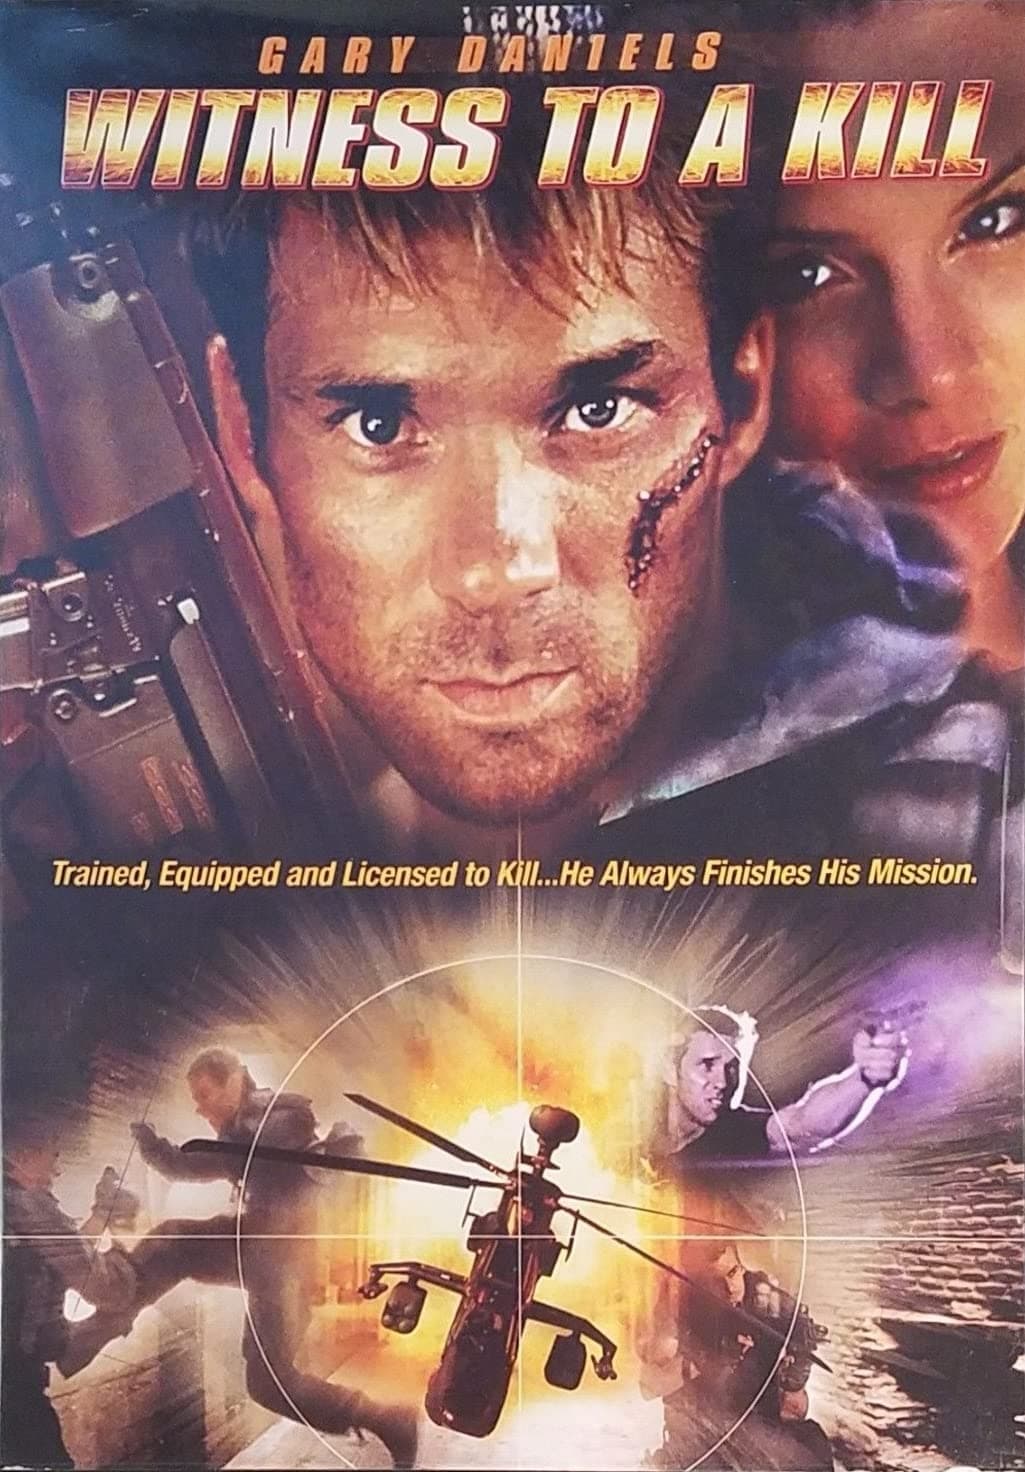 Witness to a Kill (2001)